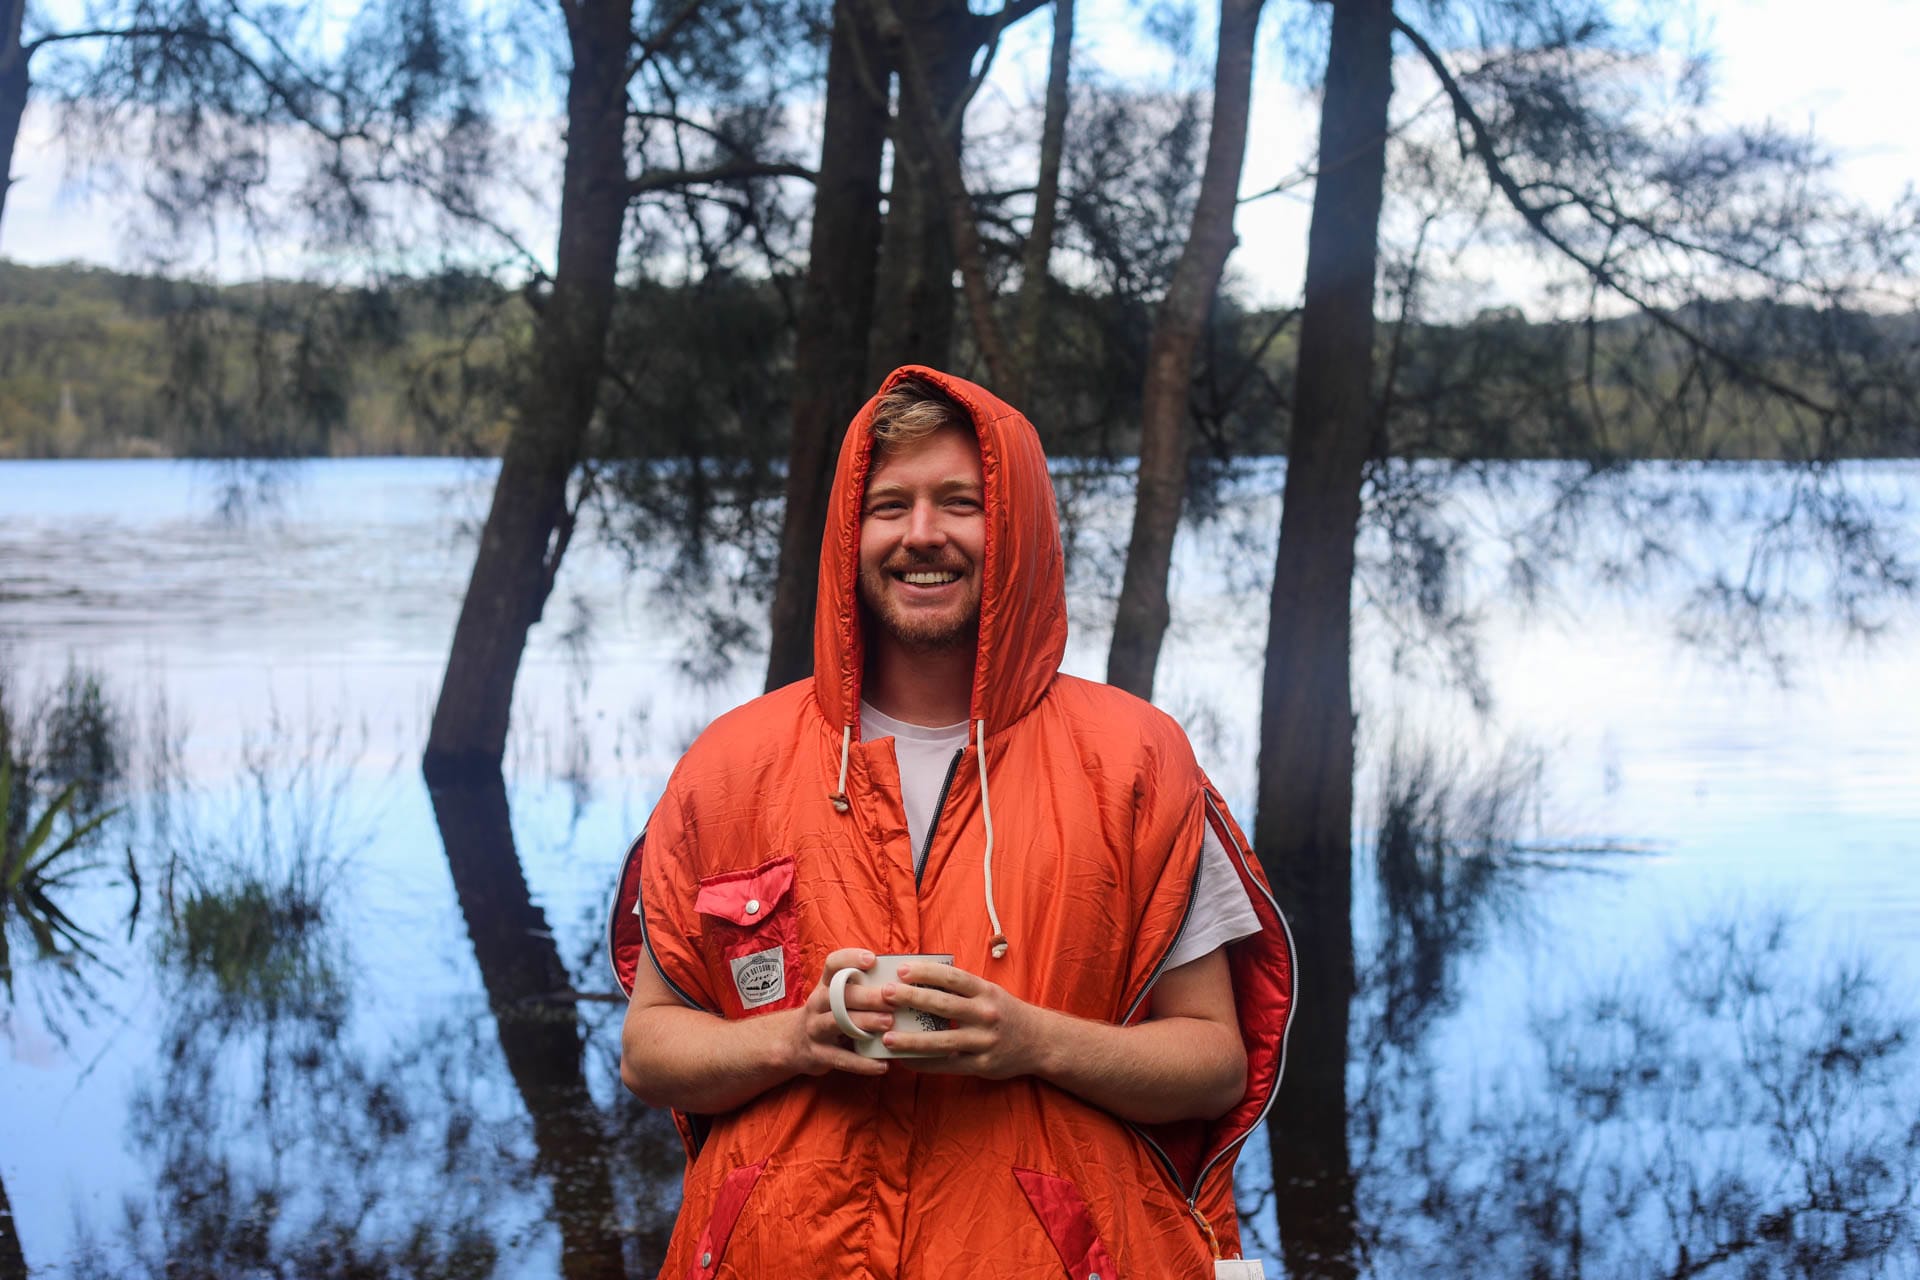 The Reversible Napsack by Poler // Gear Review, mattie gould, sleeping bag, jacket, who knows, tim ashelford